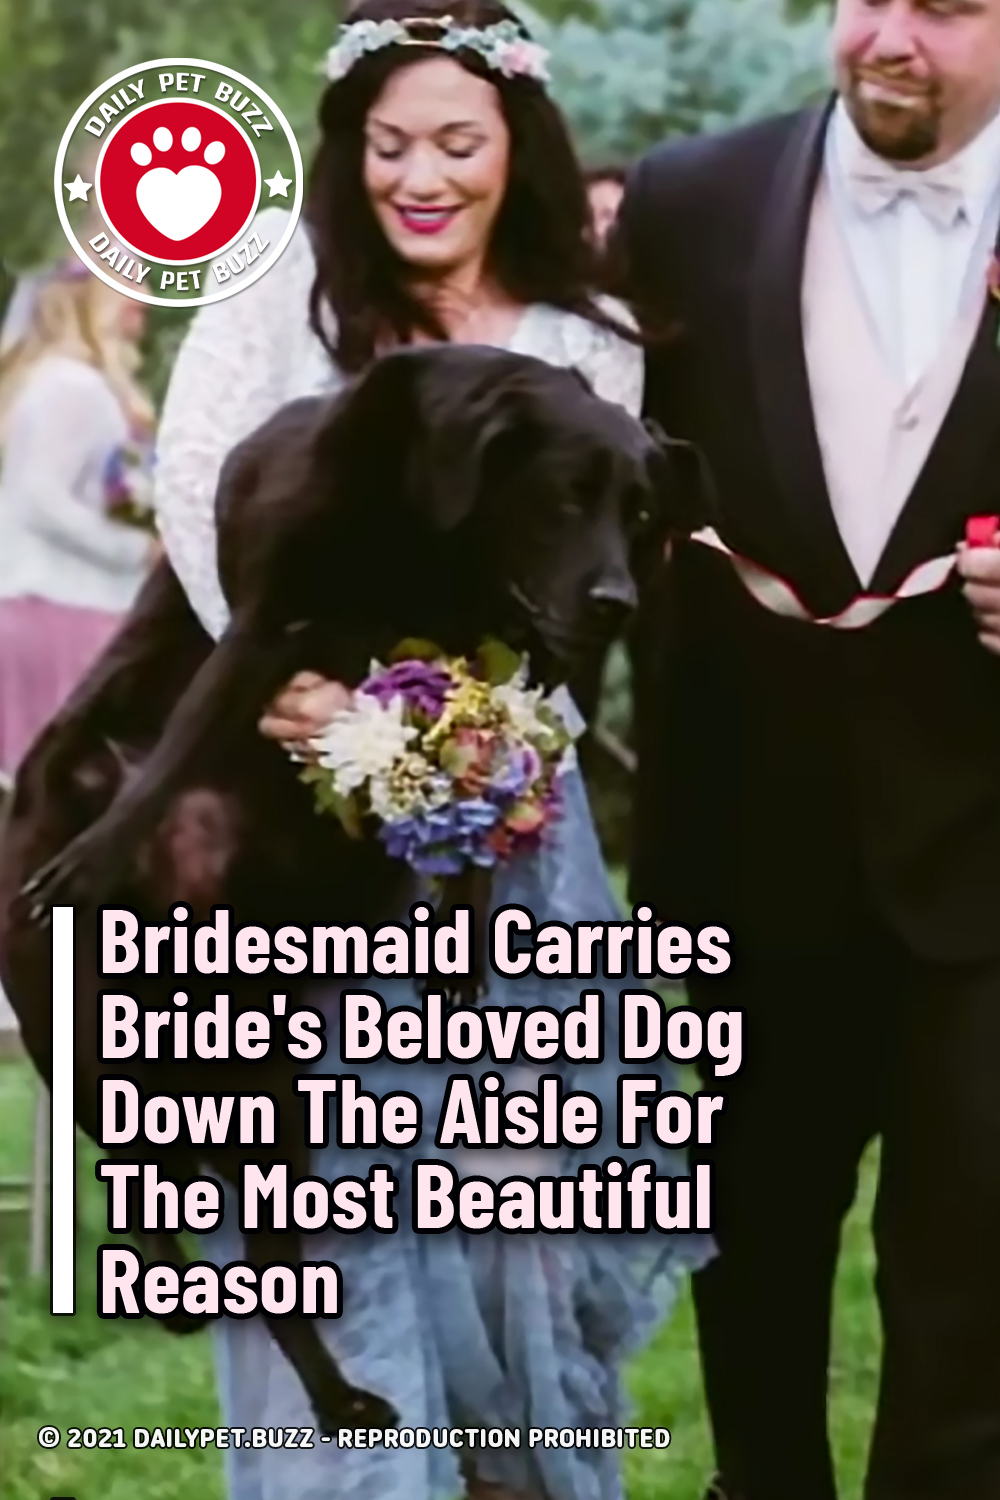 Bridesmaid Carries Bride\'s Beloved Dog Down The Aisle For The Most Beautiful Reason